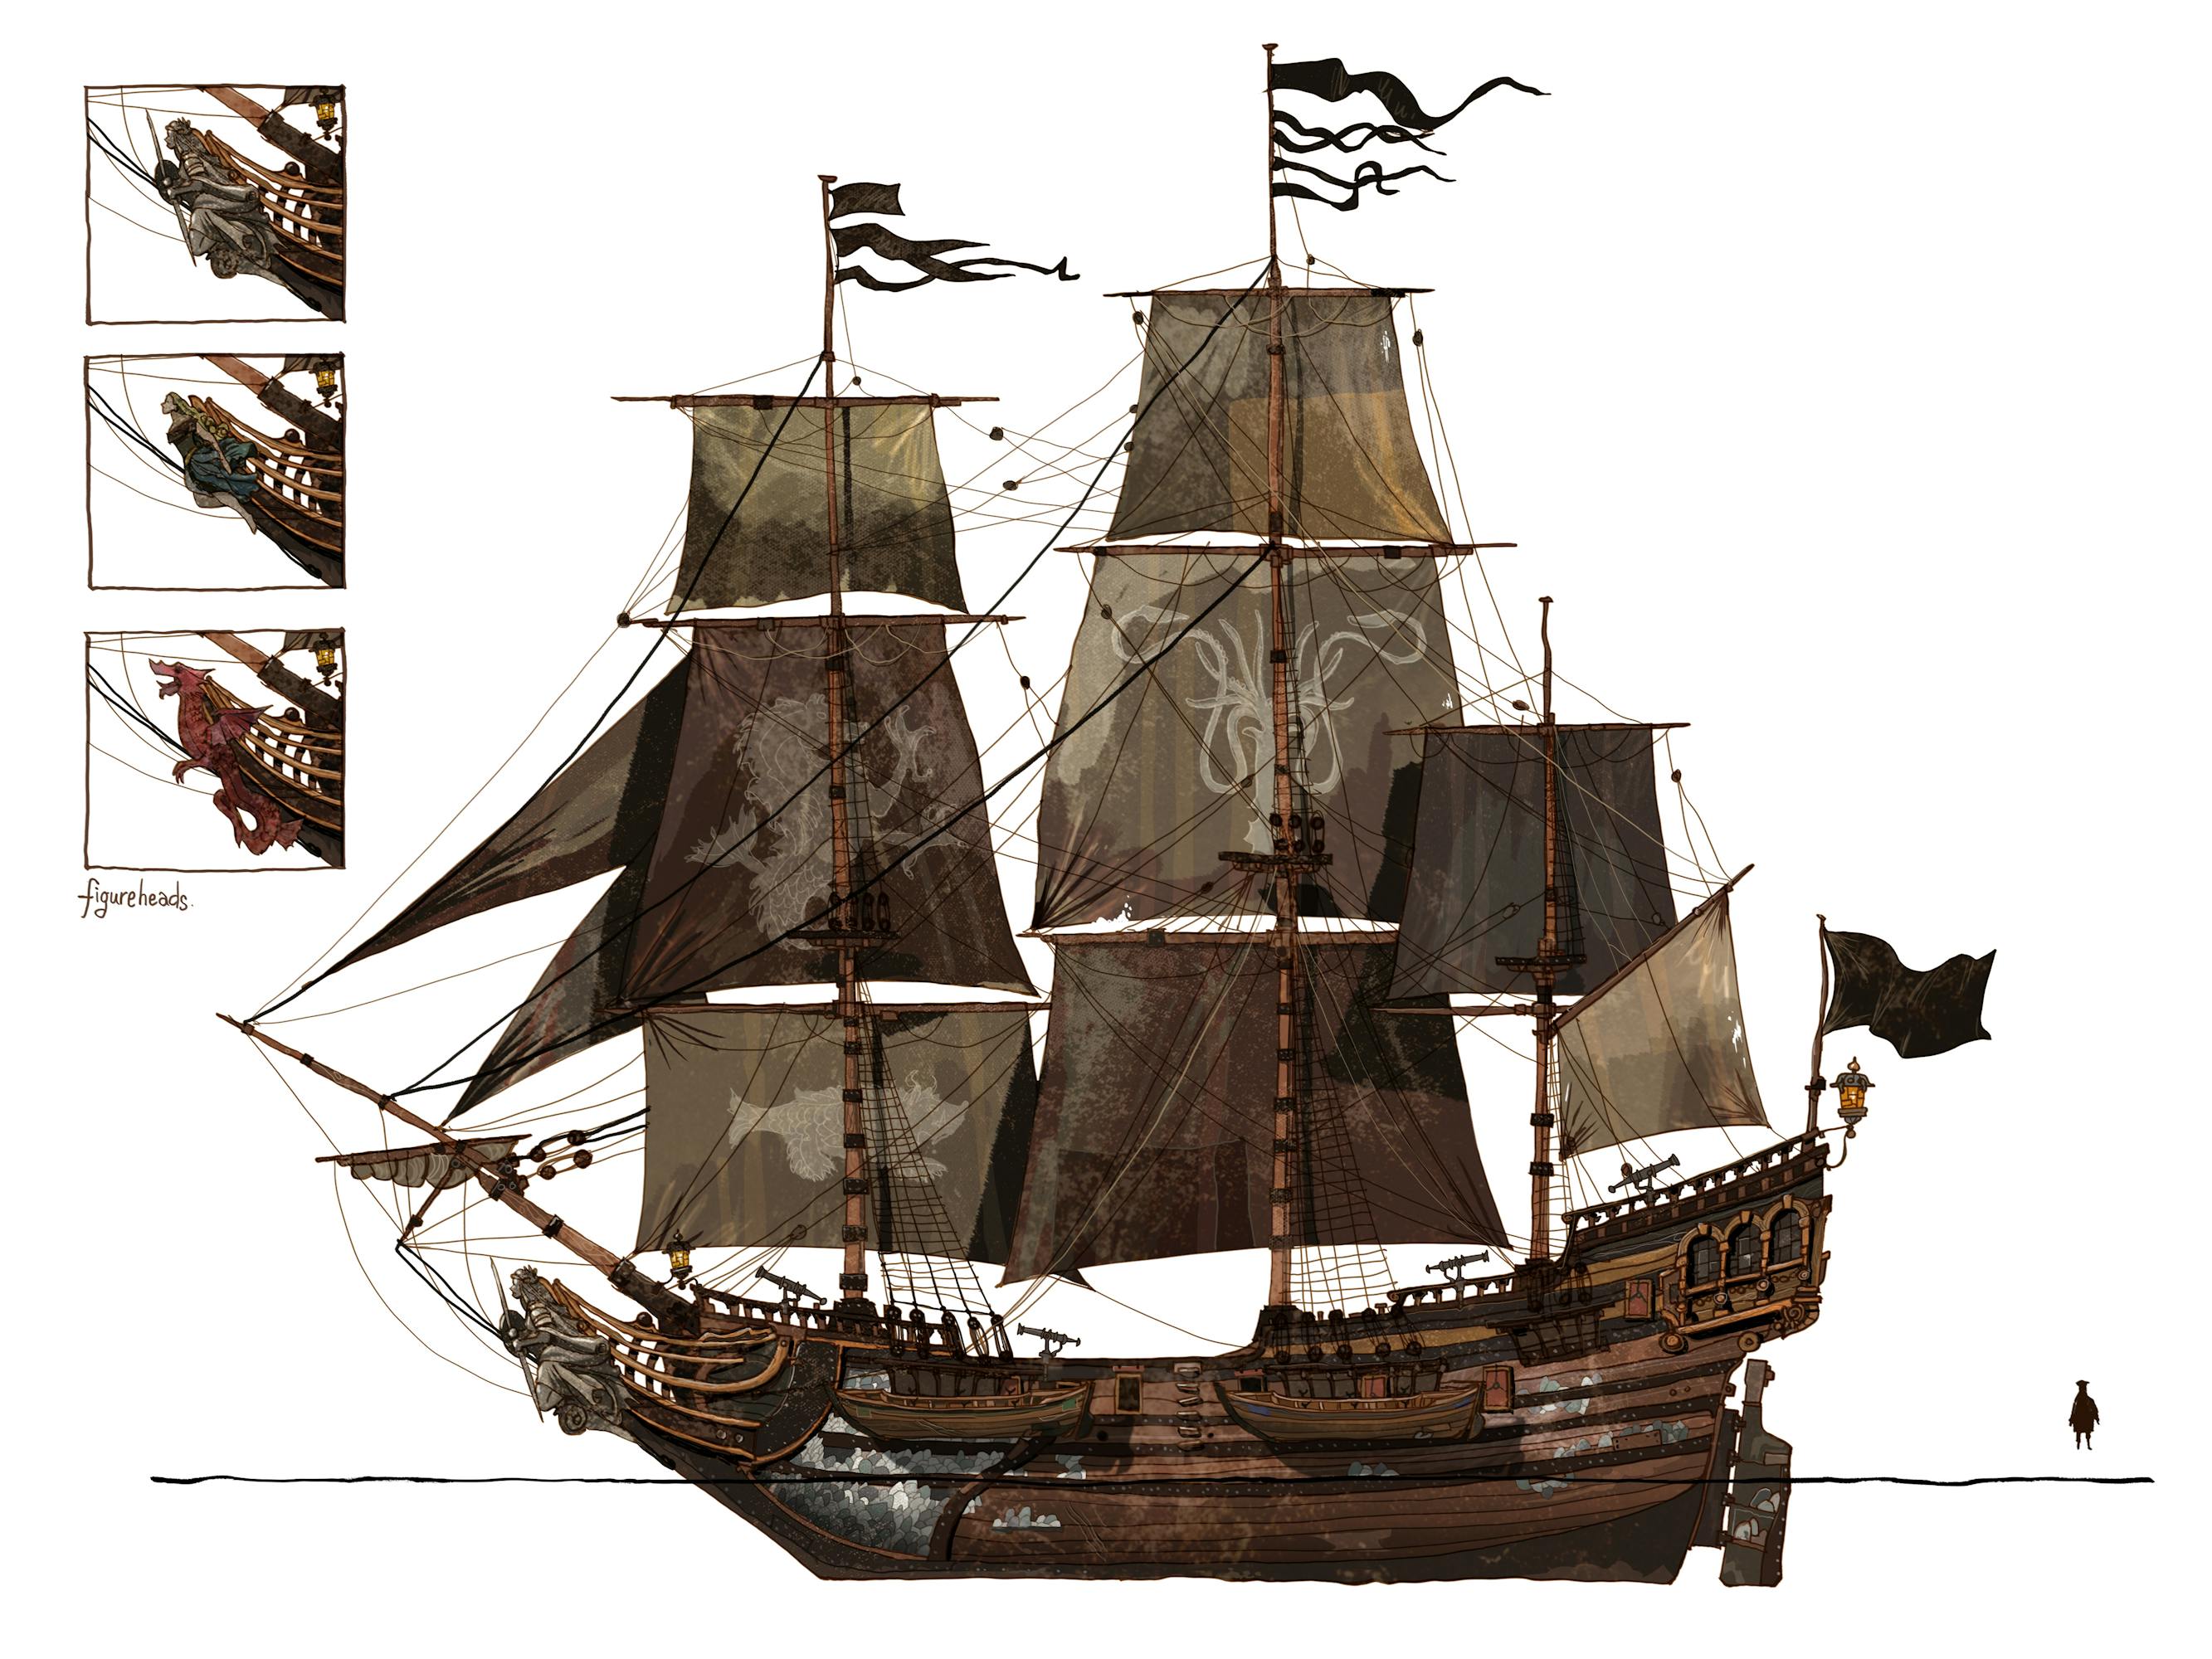 A developmental sketch of the Inevitable when the creative team were exploring various figureheads for the monster-hunting ship. The hull is wooden and brown, and the shades are varying shades of brown as well.